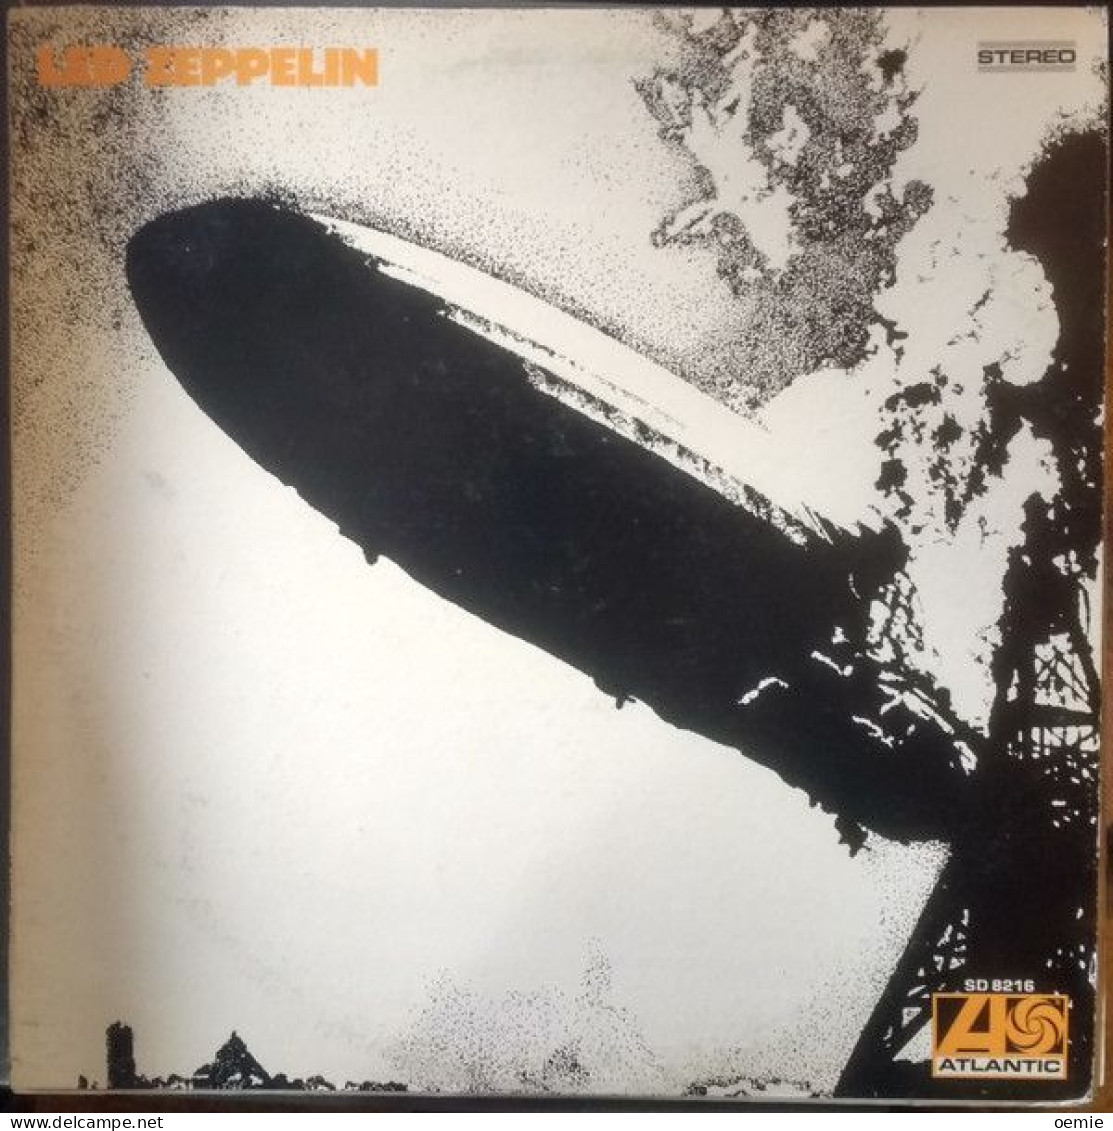 LED ZEPPELIN - Other - English Music